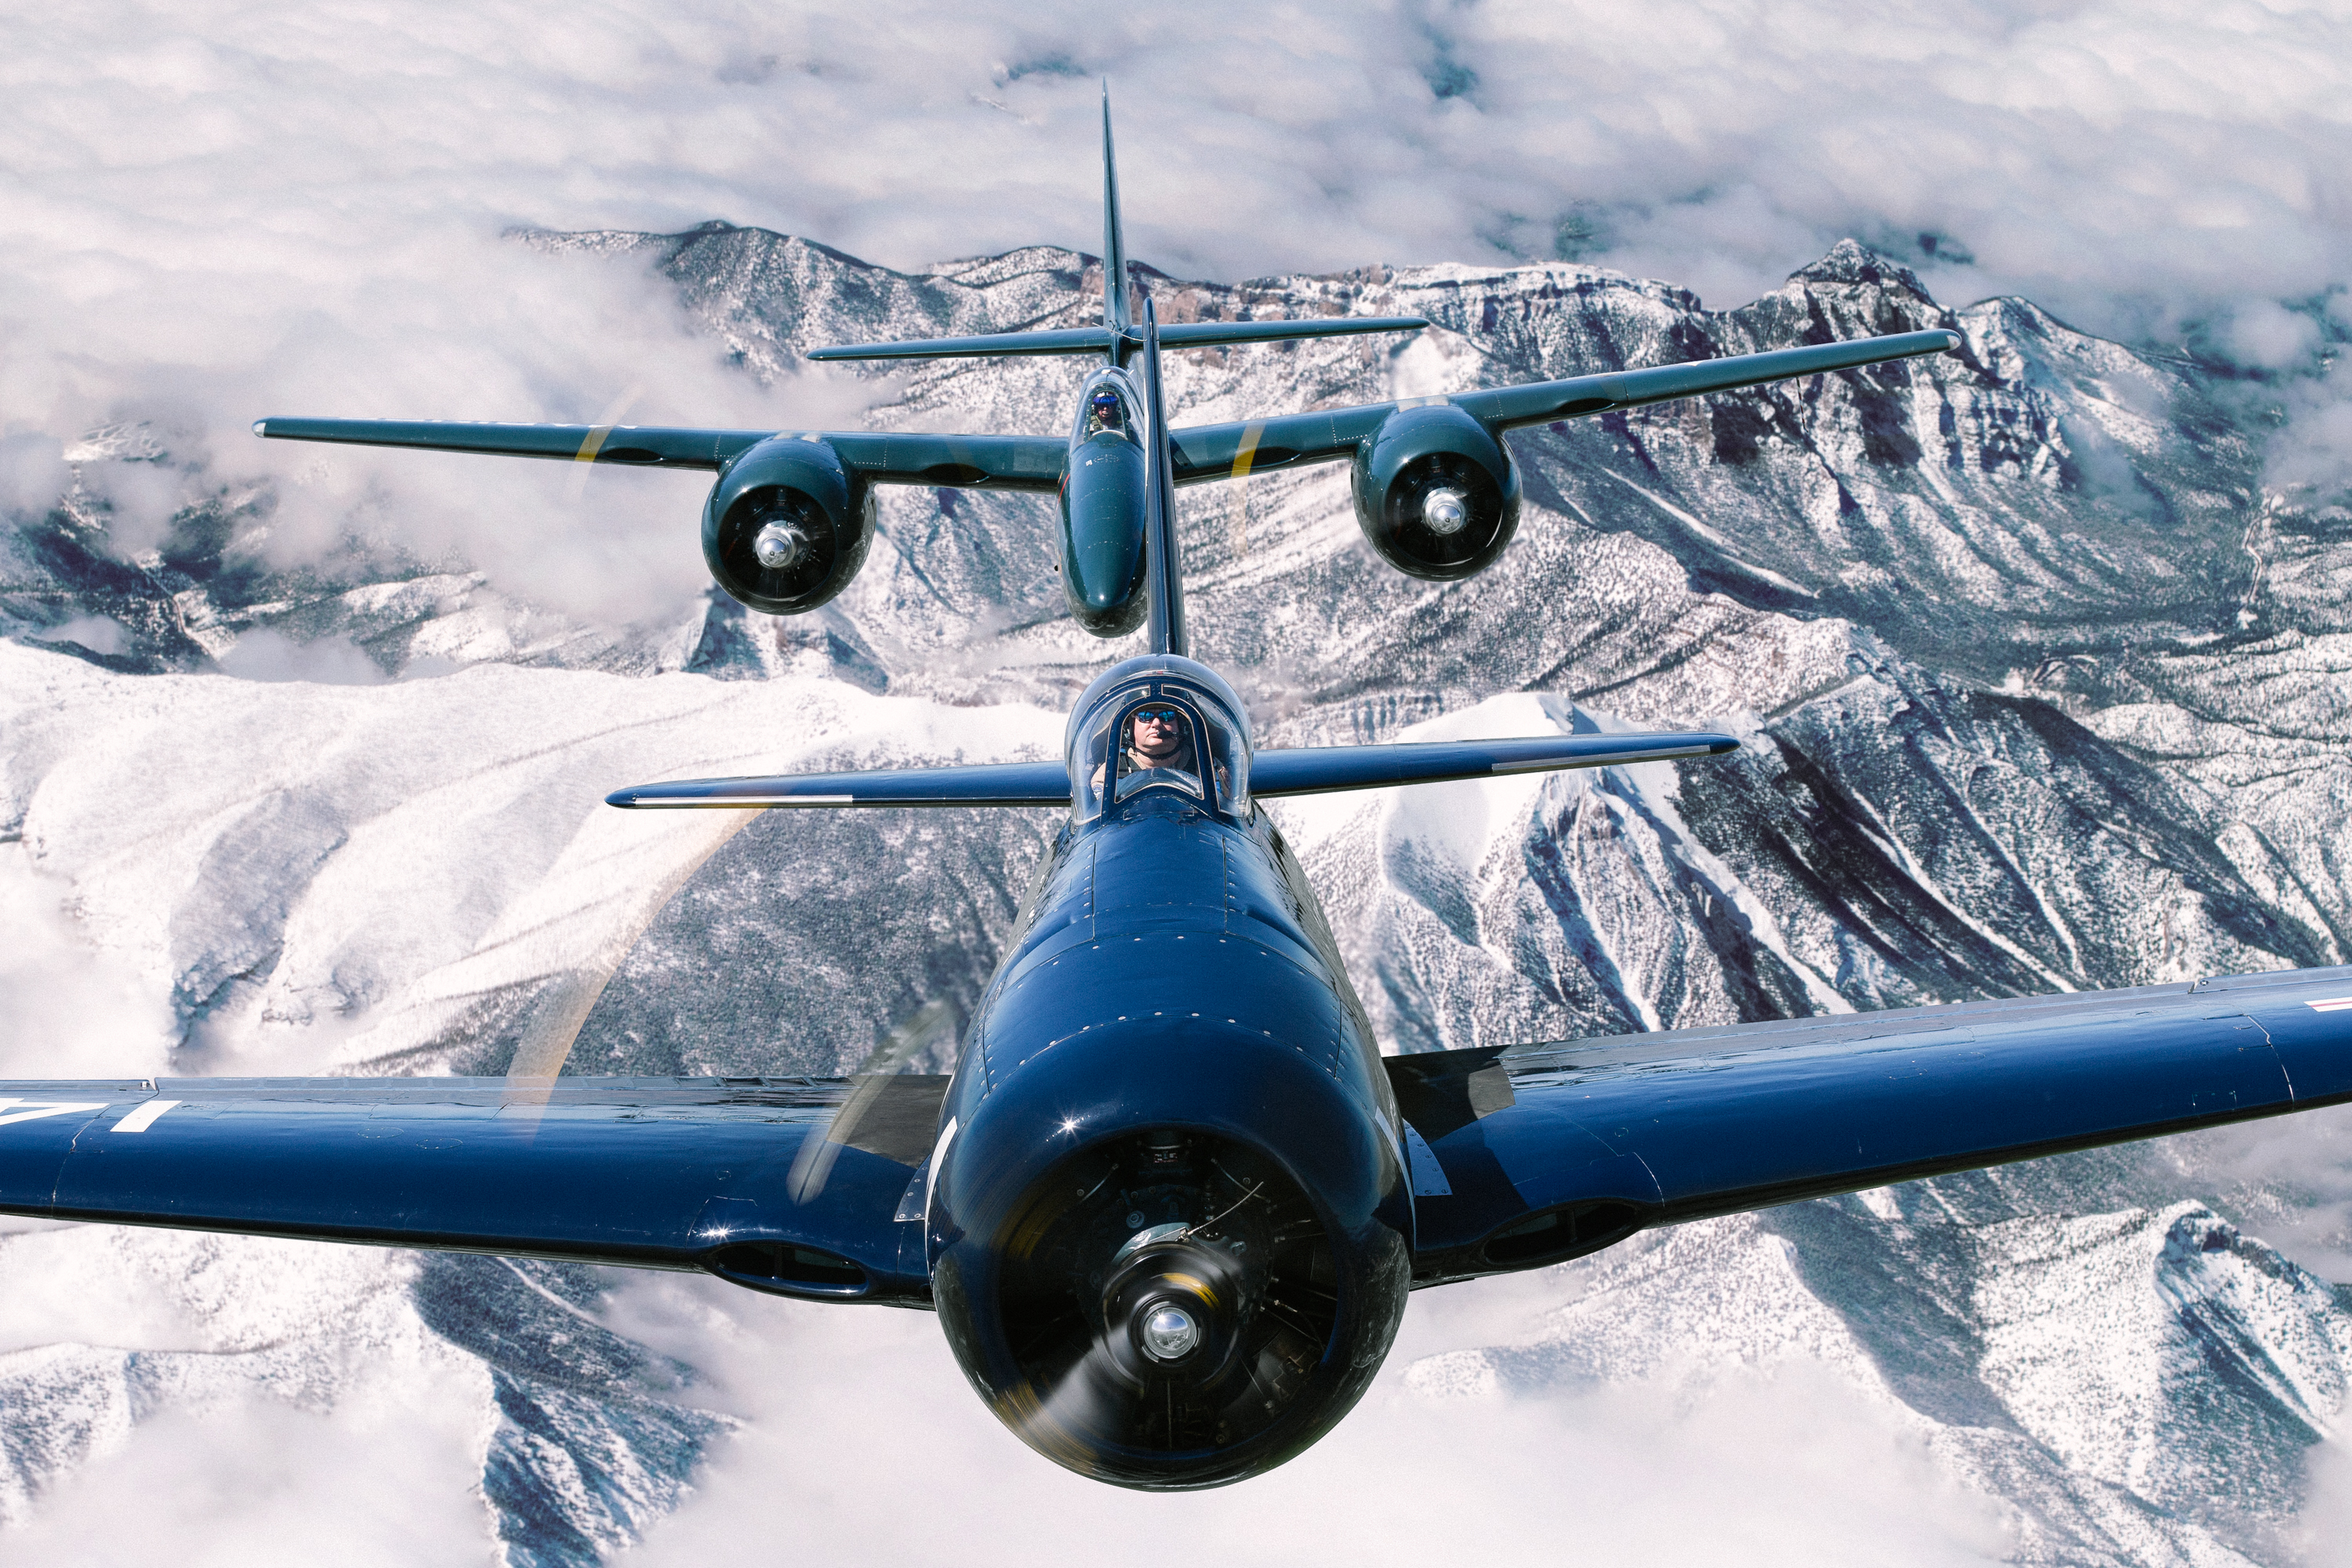 Exceptional Photographs of Airplanes That Will Blow Your Mind